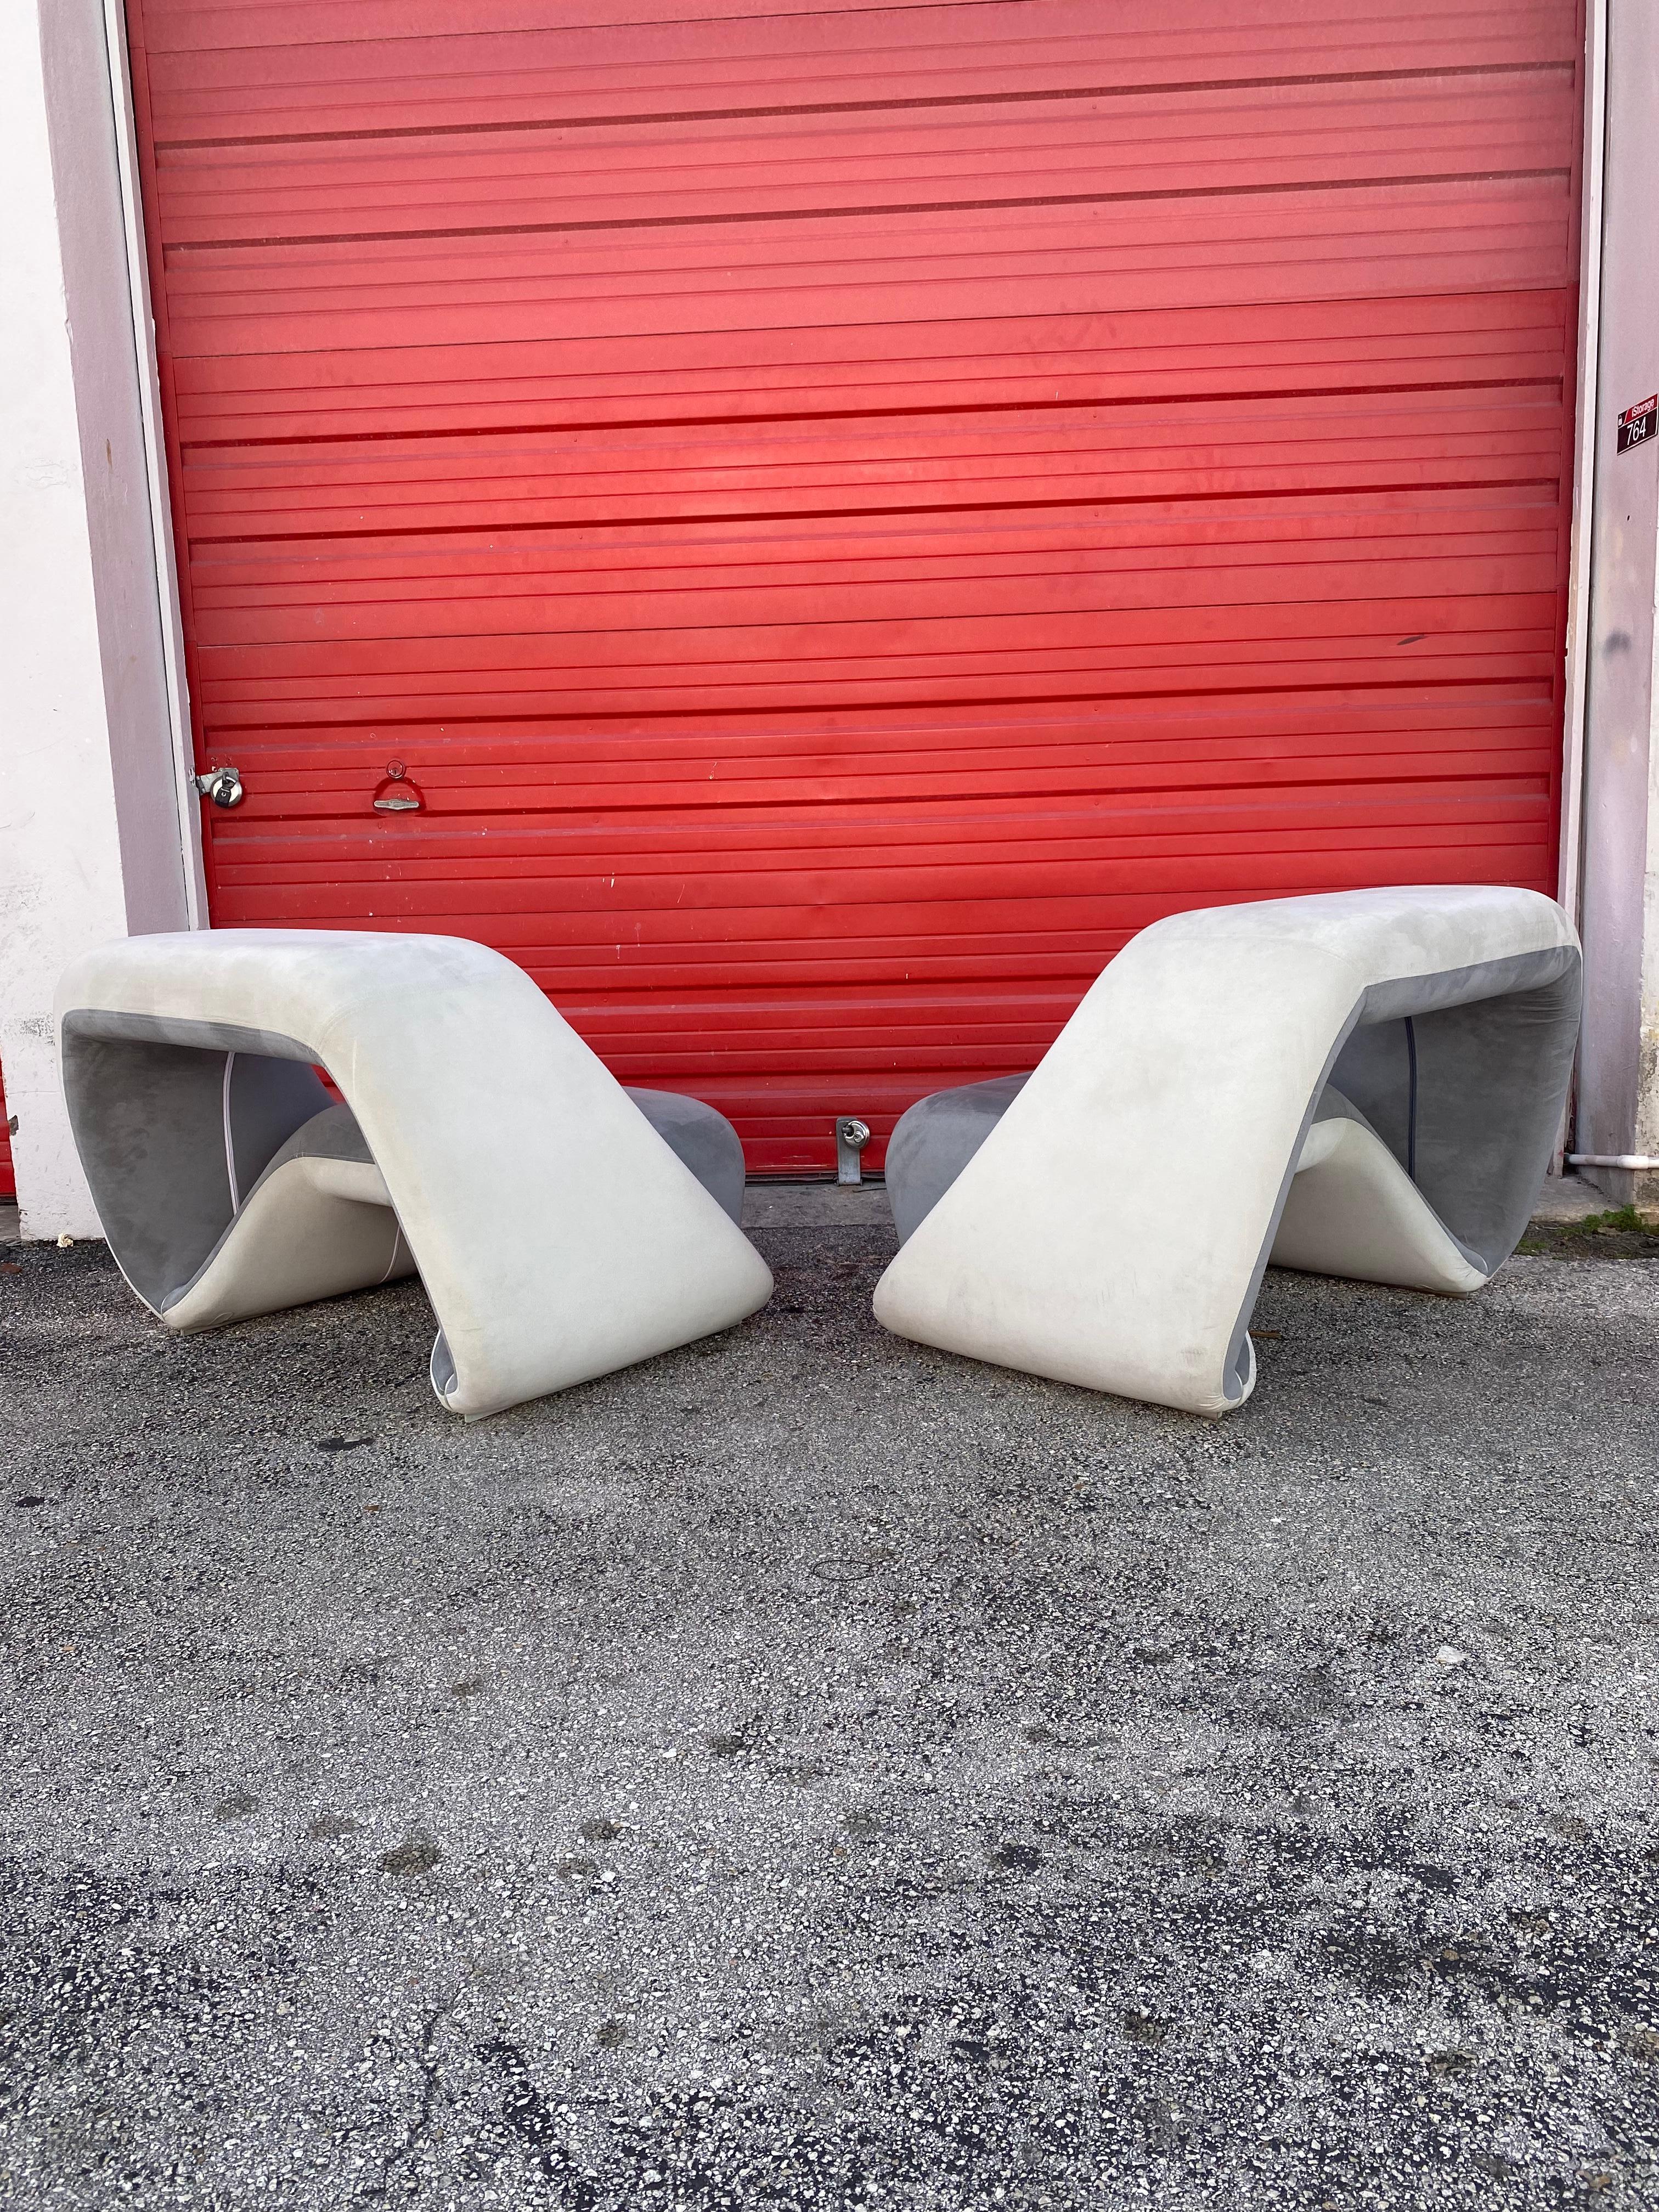 Ultrasuede 1970s Meritalia Sculptural Space Age Air Loungers Chairs, Set of 2 For Sale